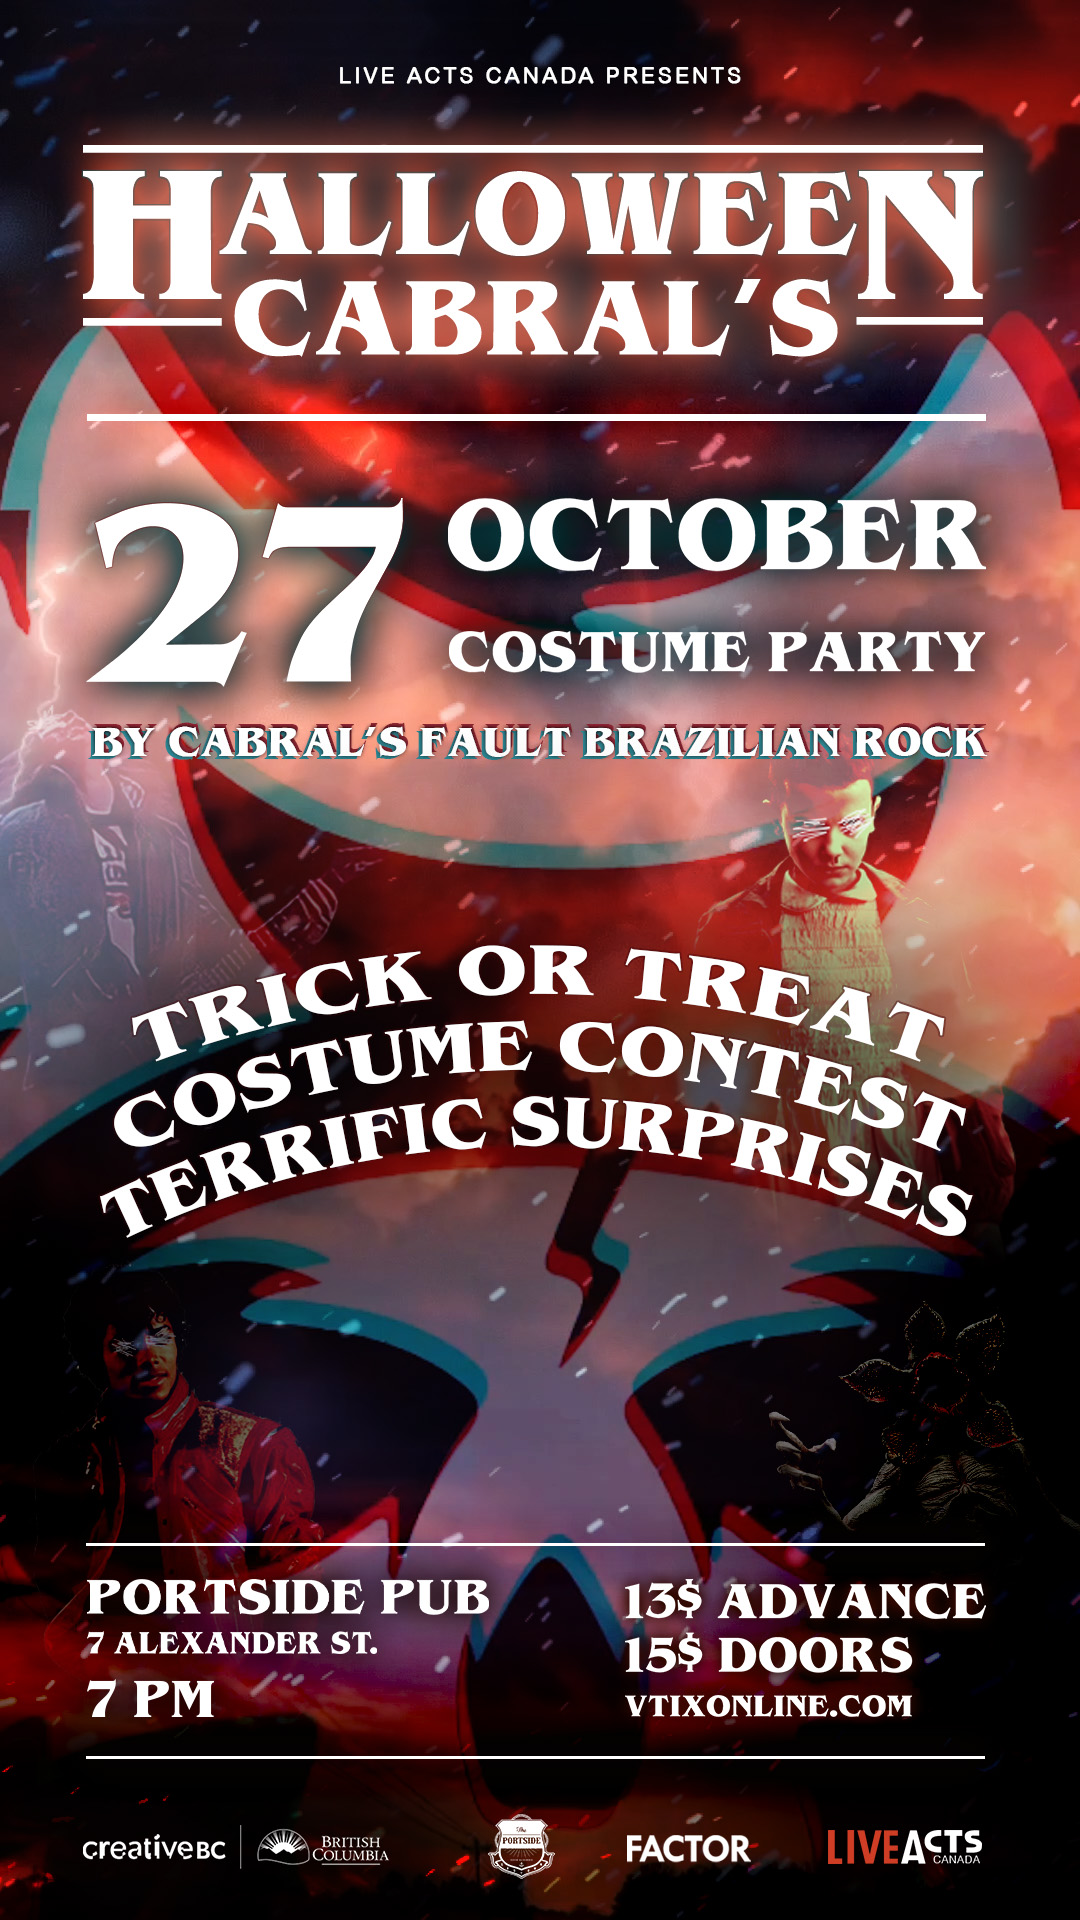 Cabral's Costume Party